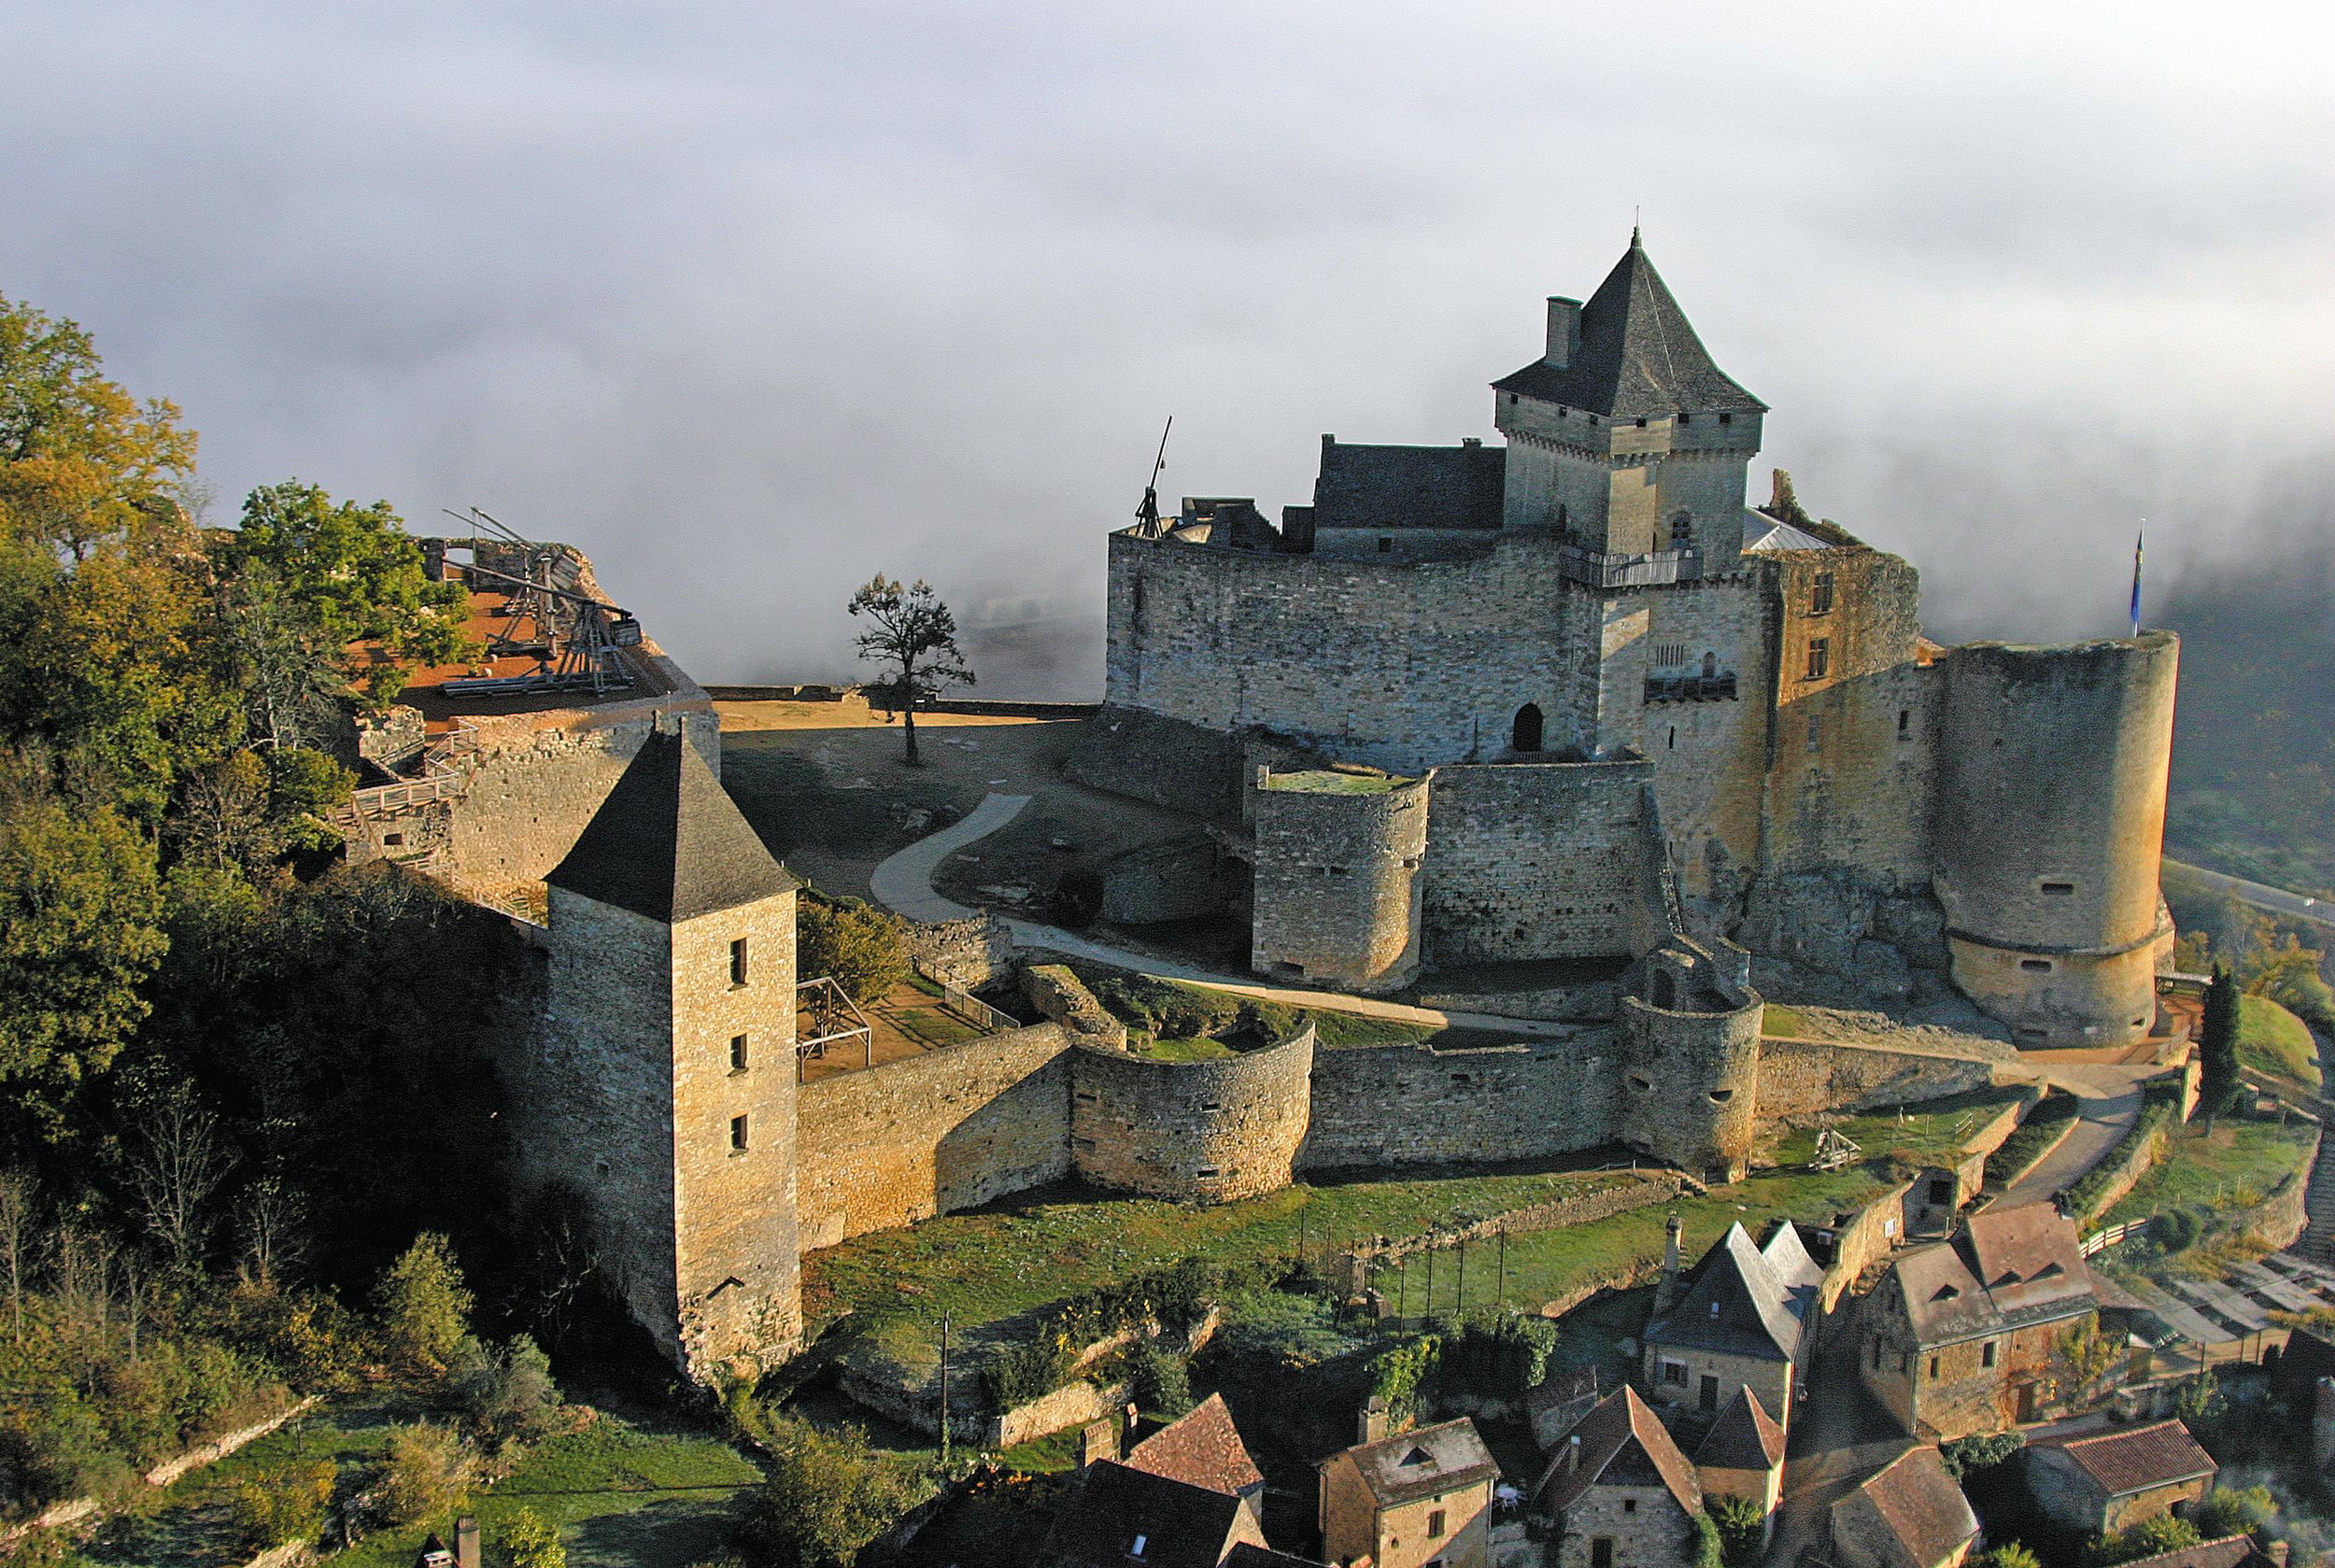 A view of the 13th century Chateau de Castelnaud in southwestern France.